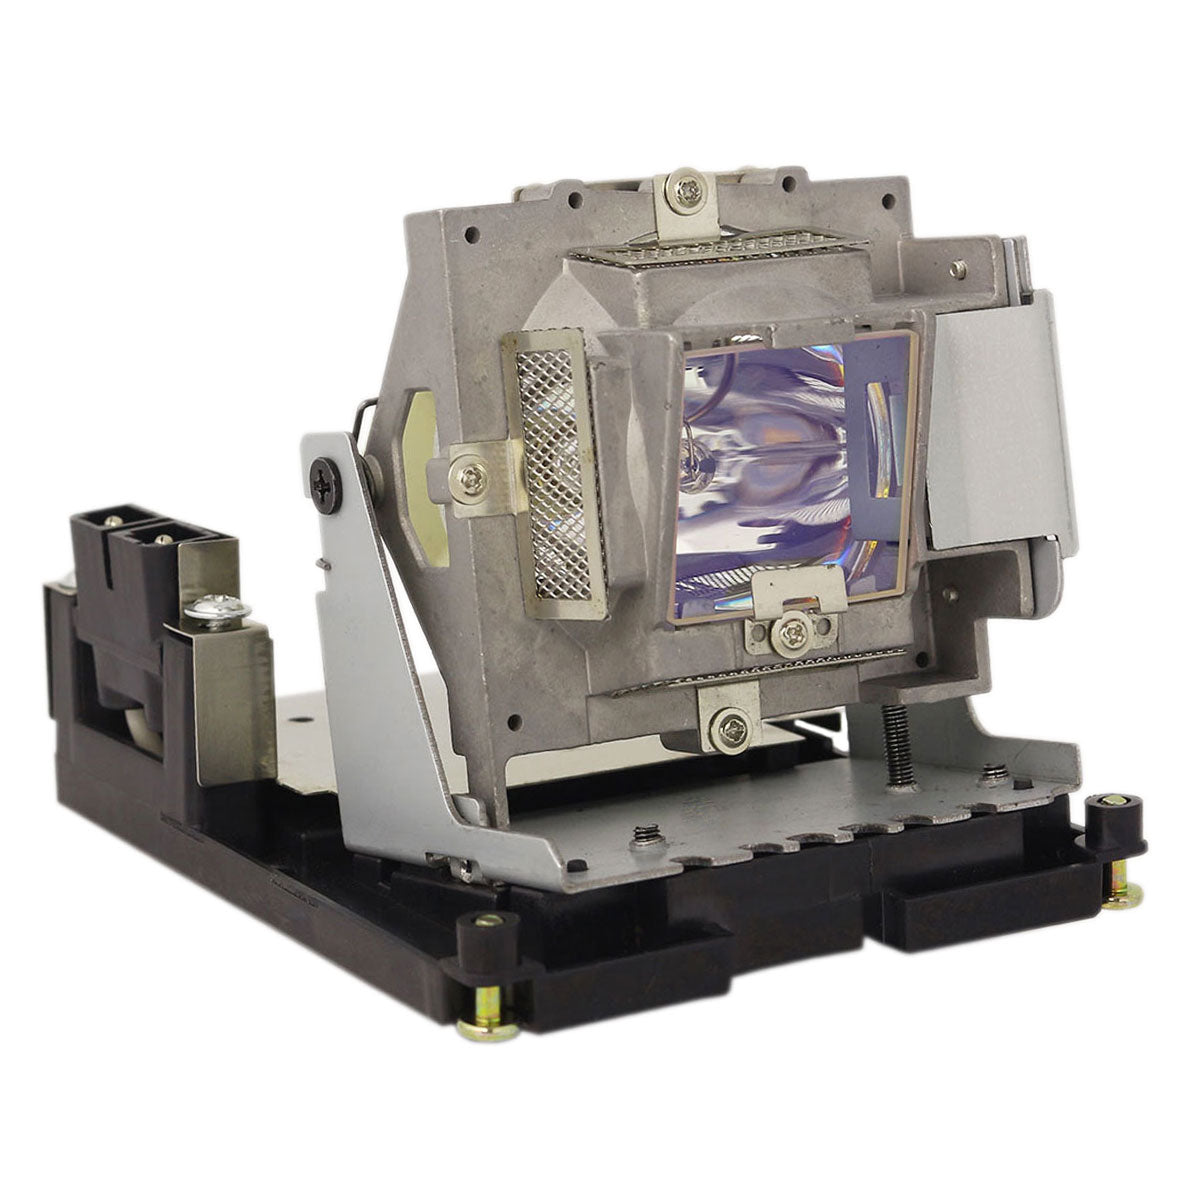 PolyVision 2002031-001 Osram Projector Lamp Module